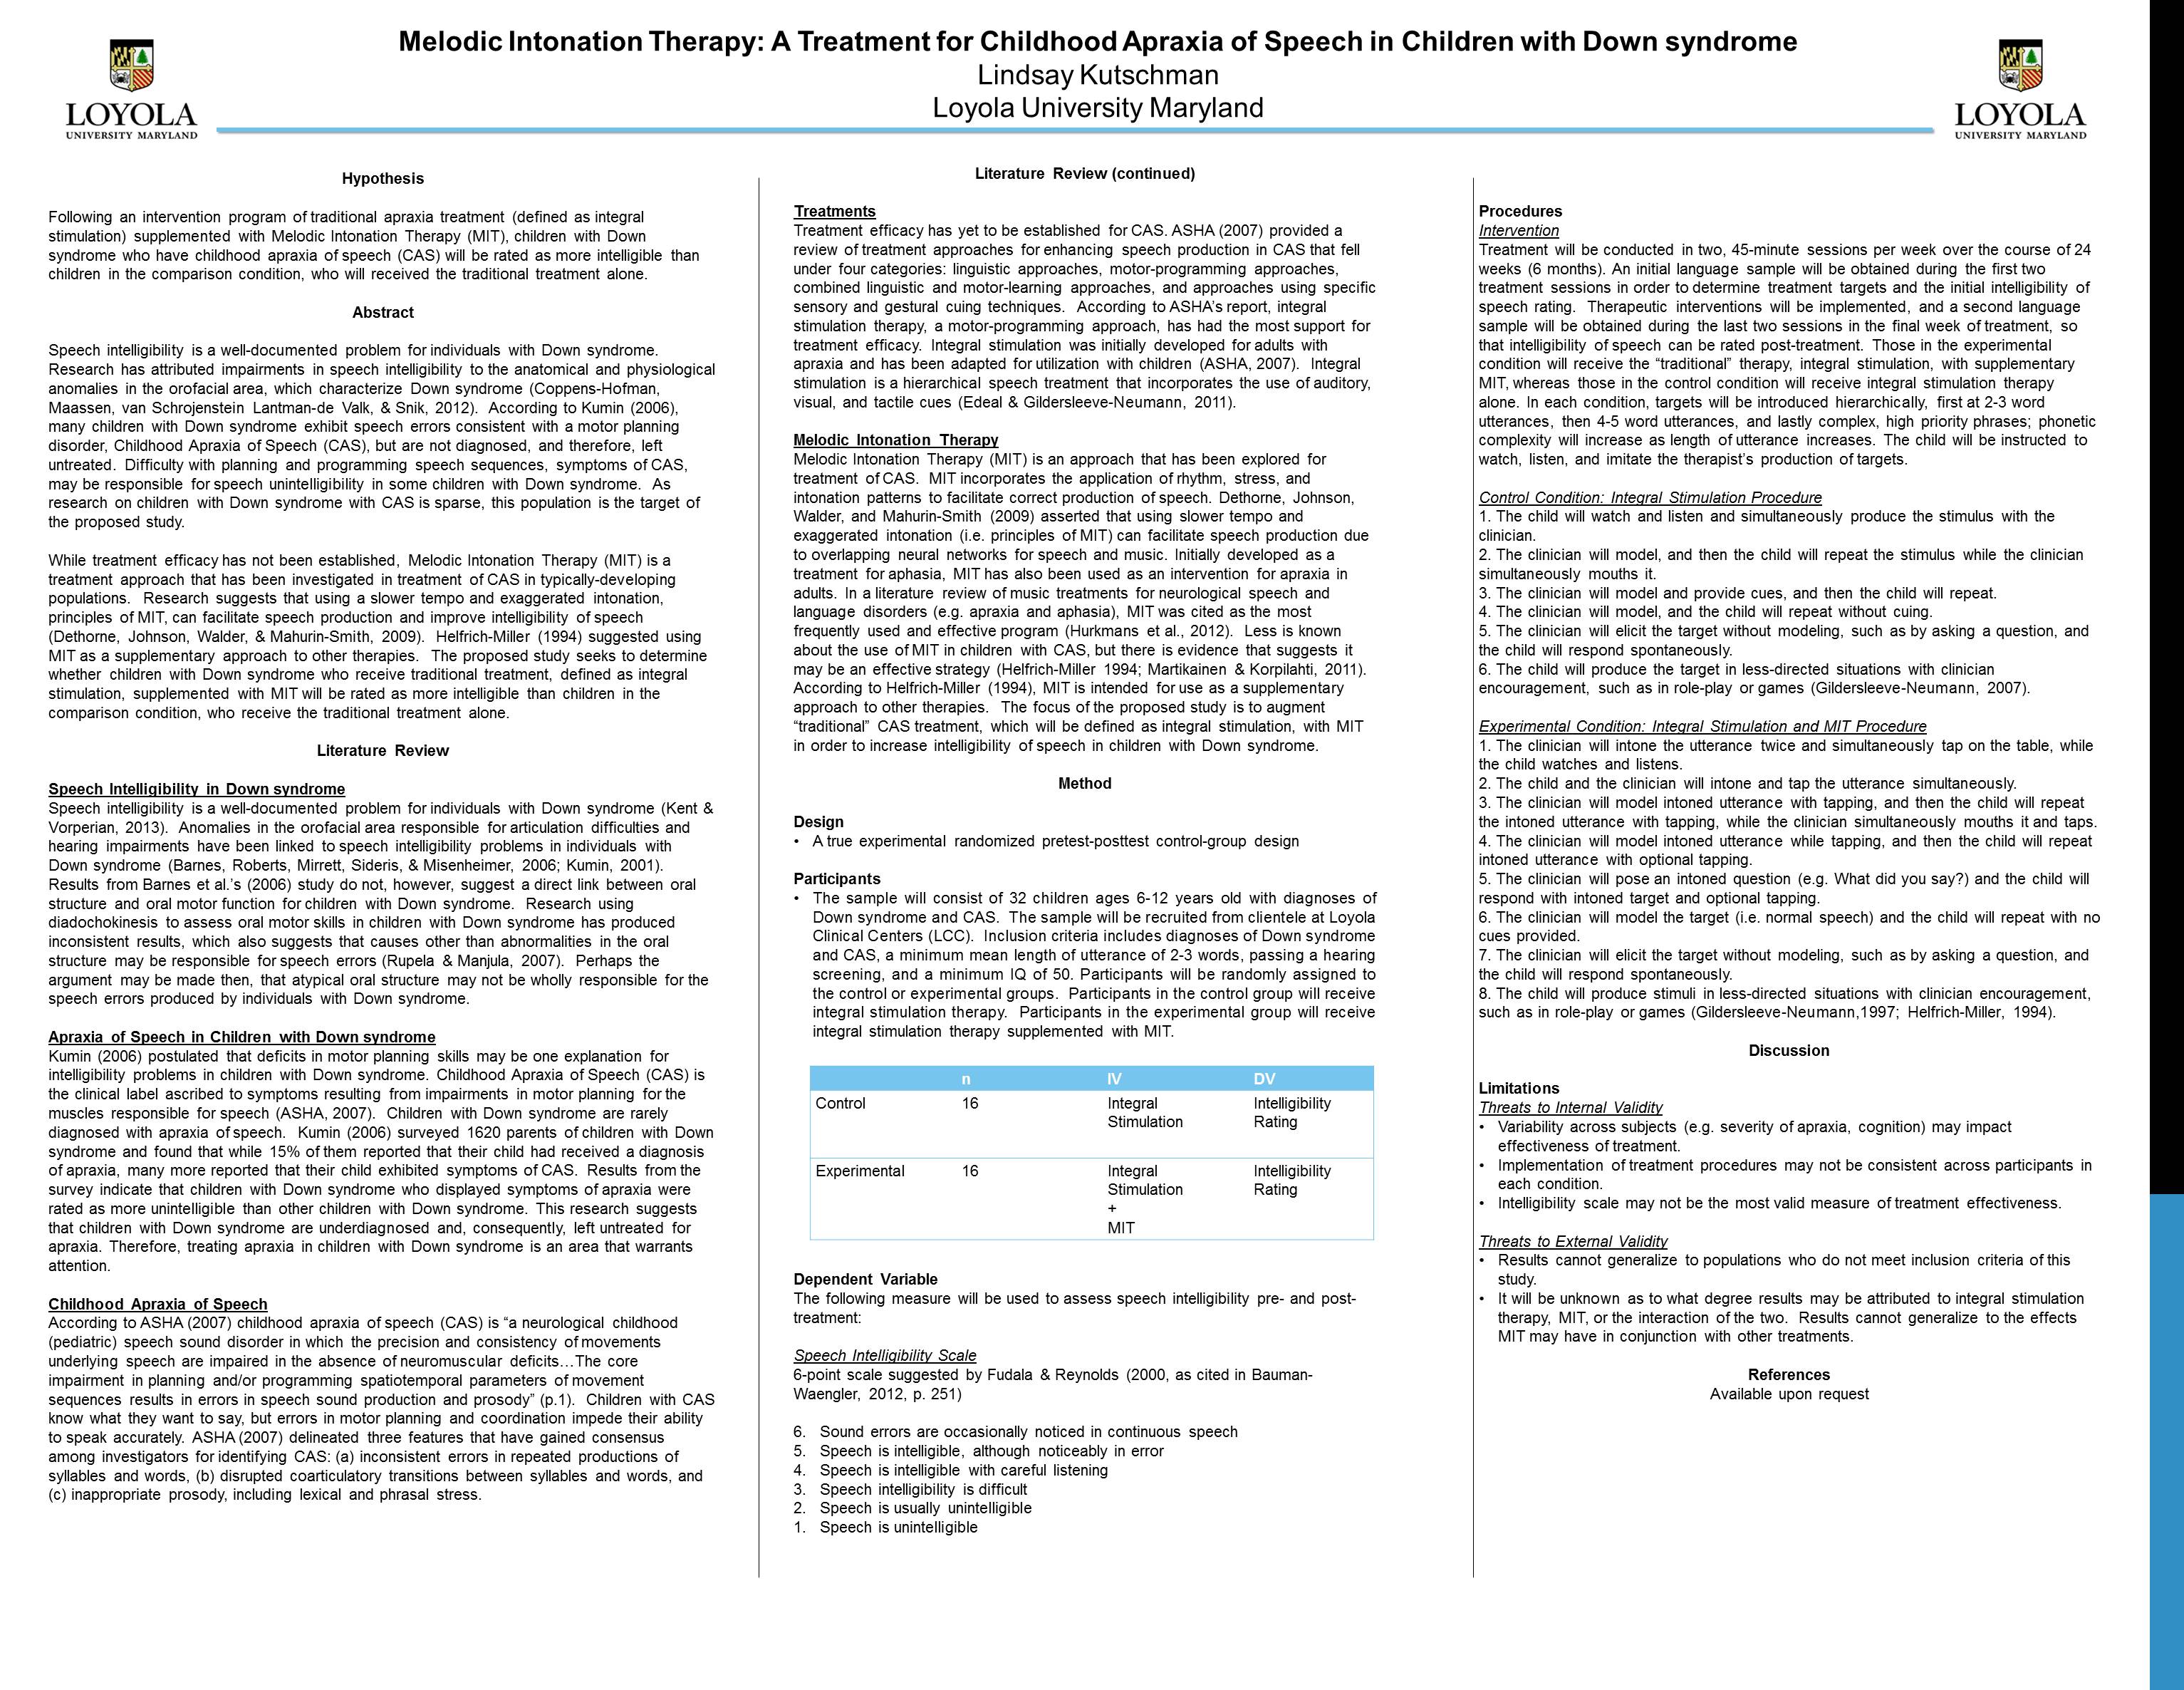 poster image: 'Melodic Intonation Therapy: A Treatment for Childhood Aprazia of Speech in Children with Down Syndrome'